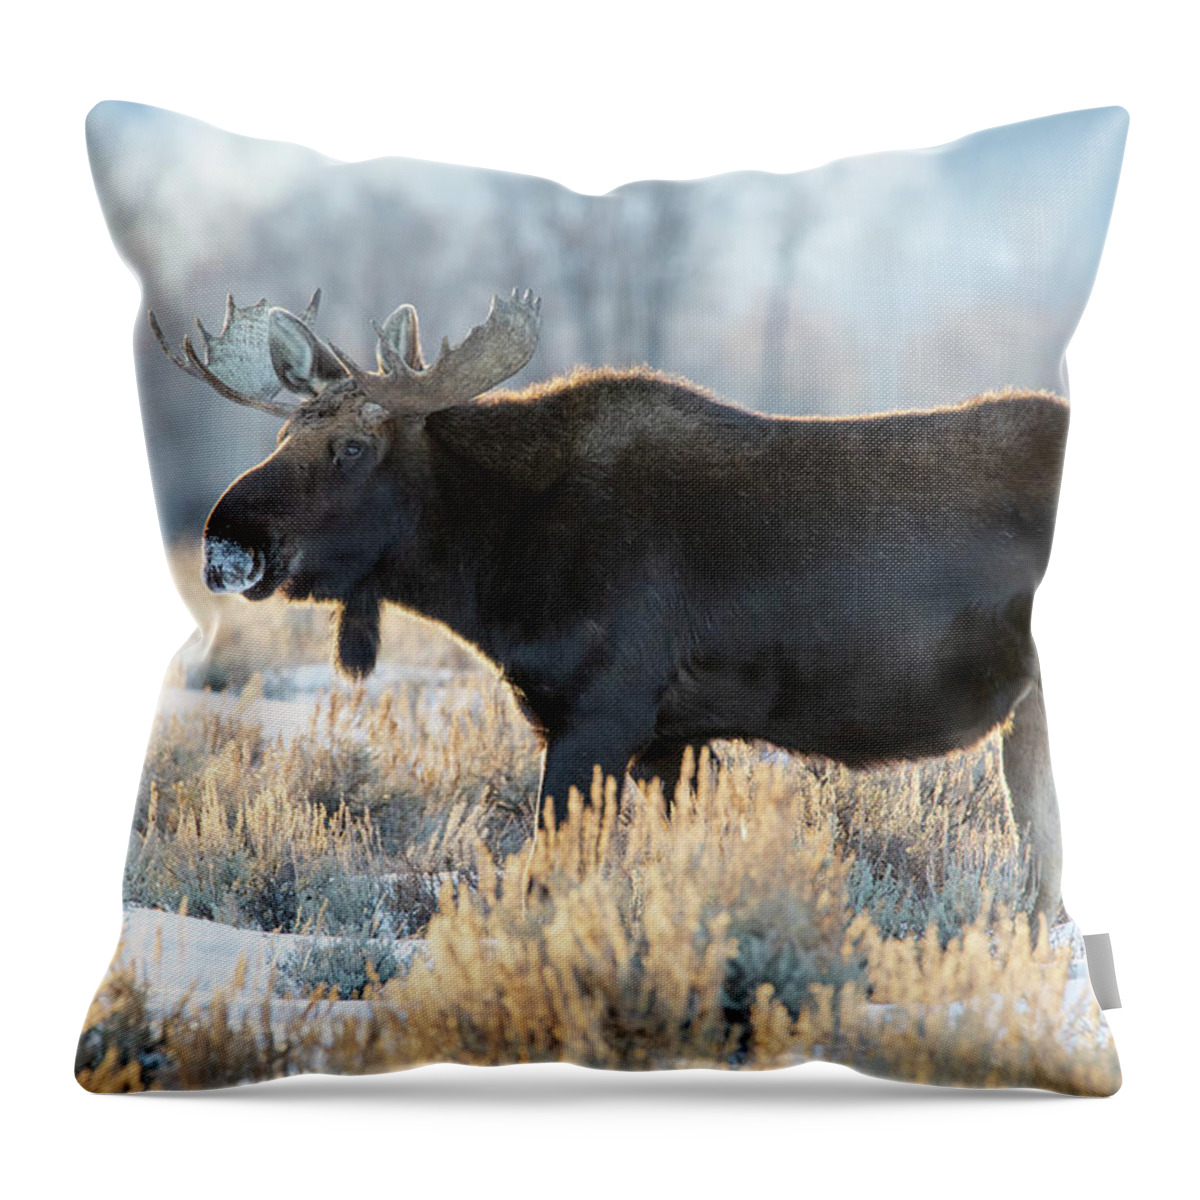 Moose Throw Pillow featuring the photograph Bull Moose by Bret Barton